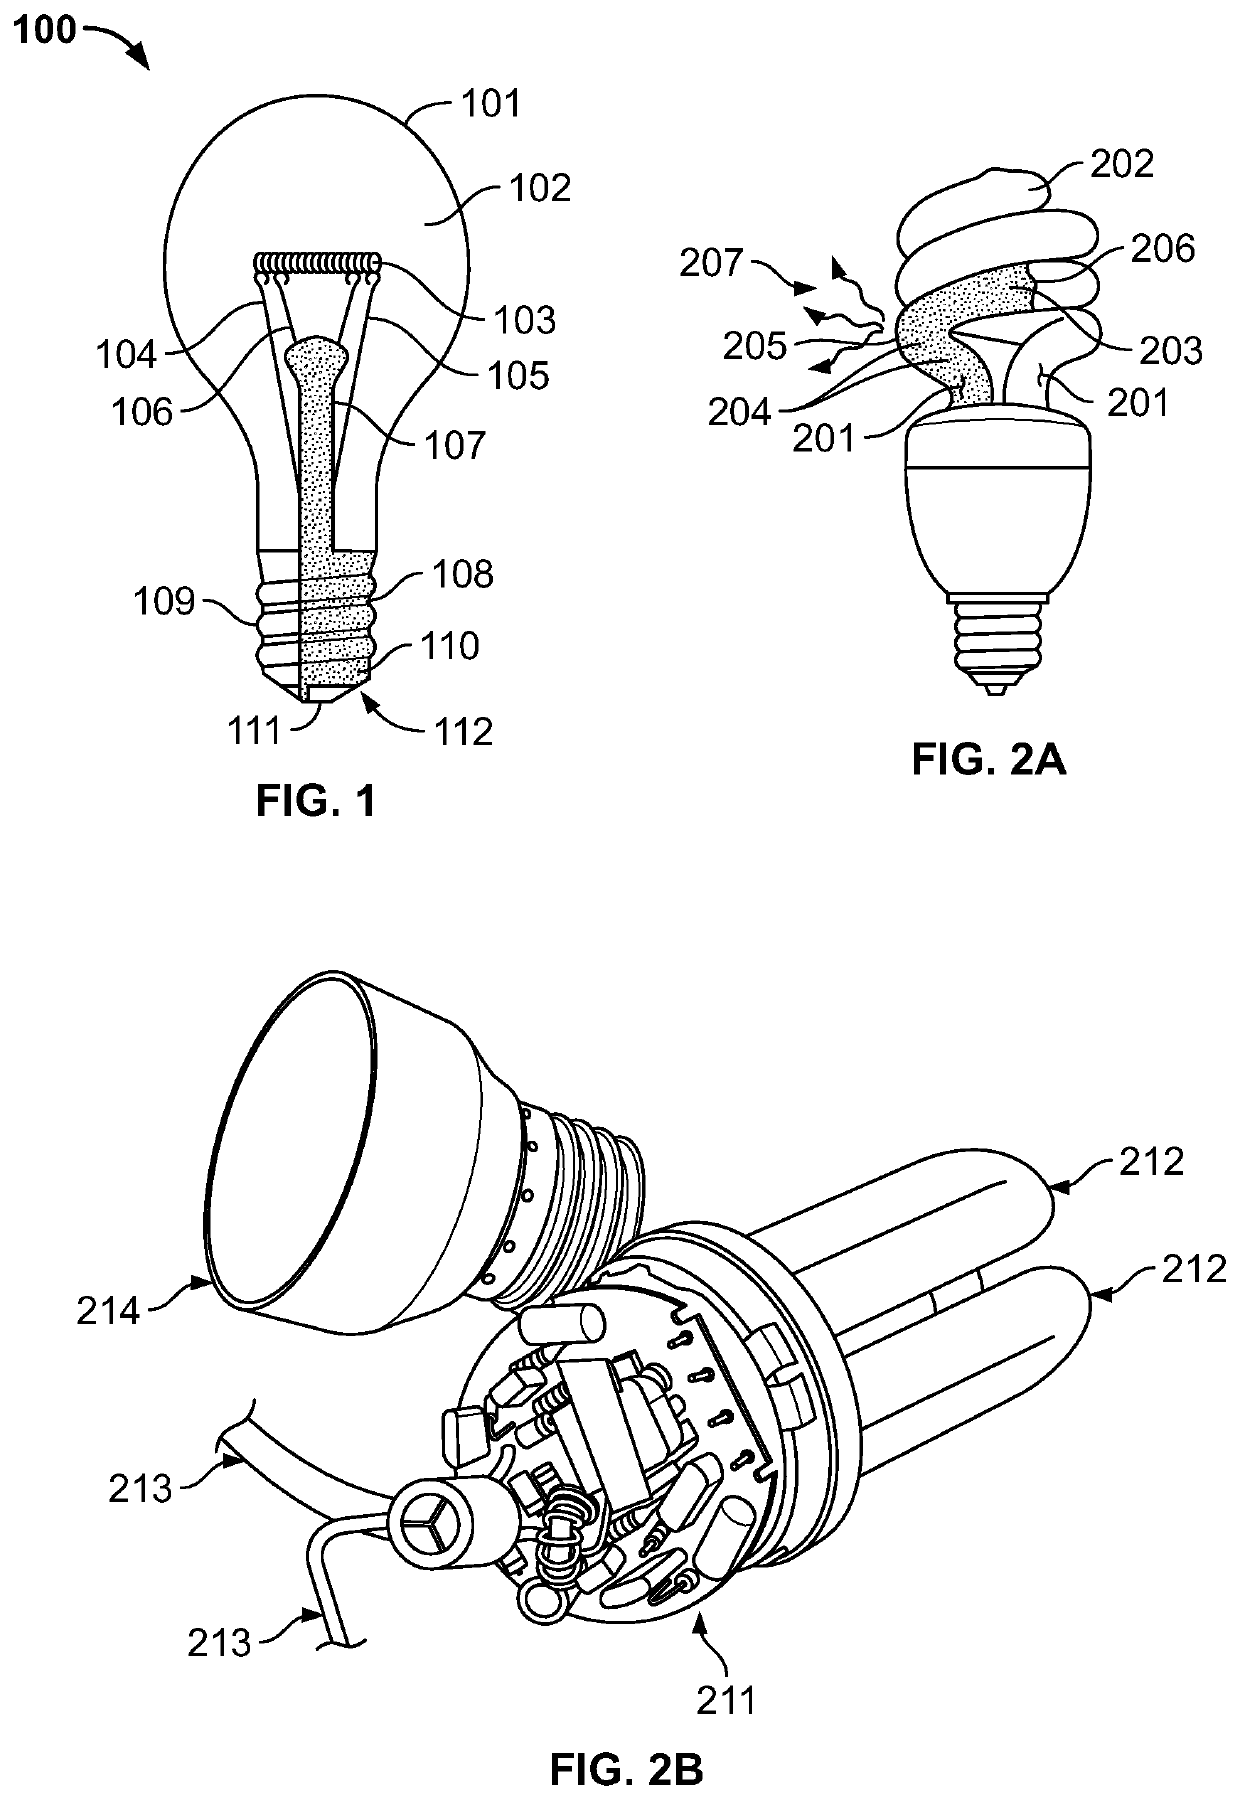 LED light bulb construction and manufacture